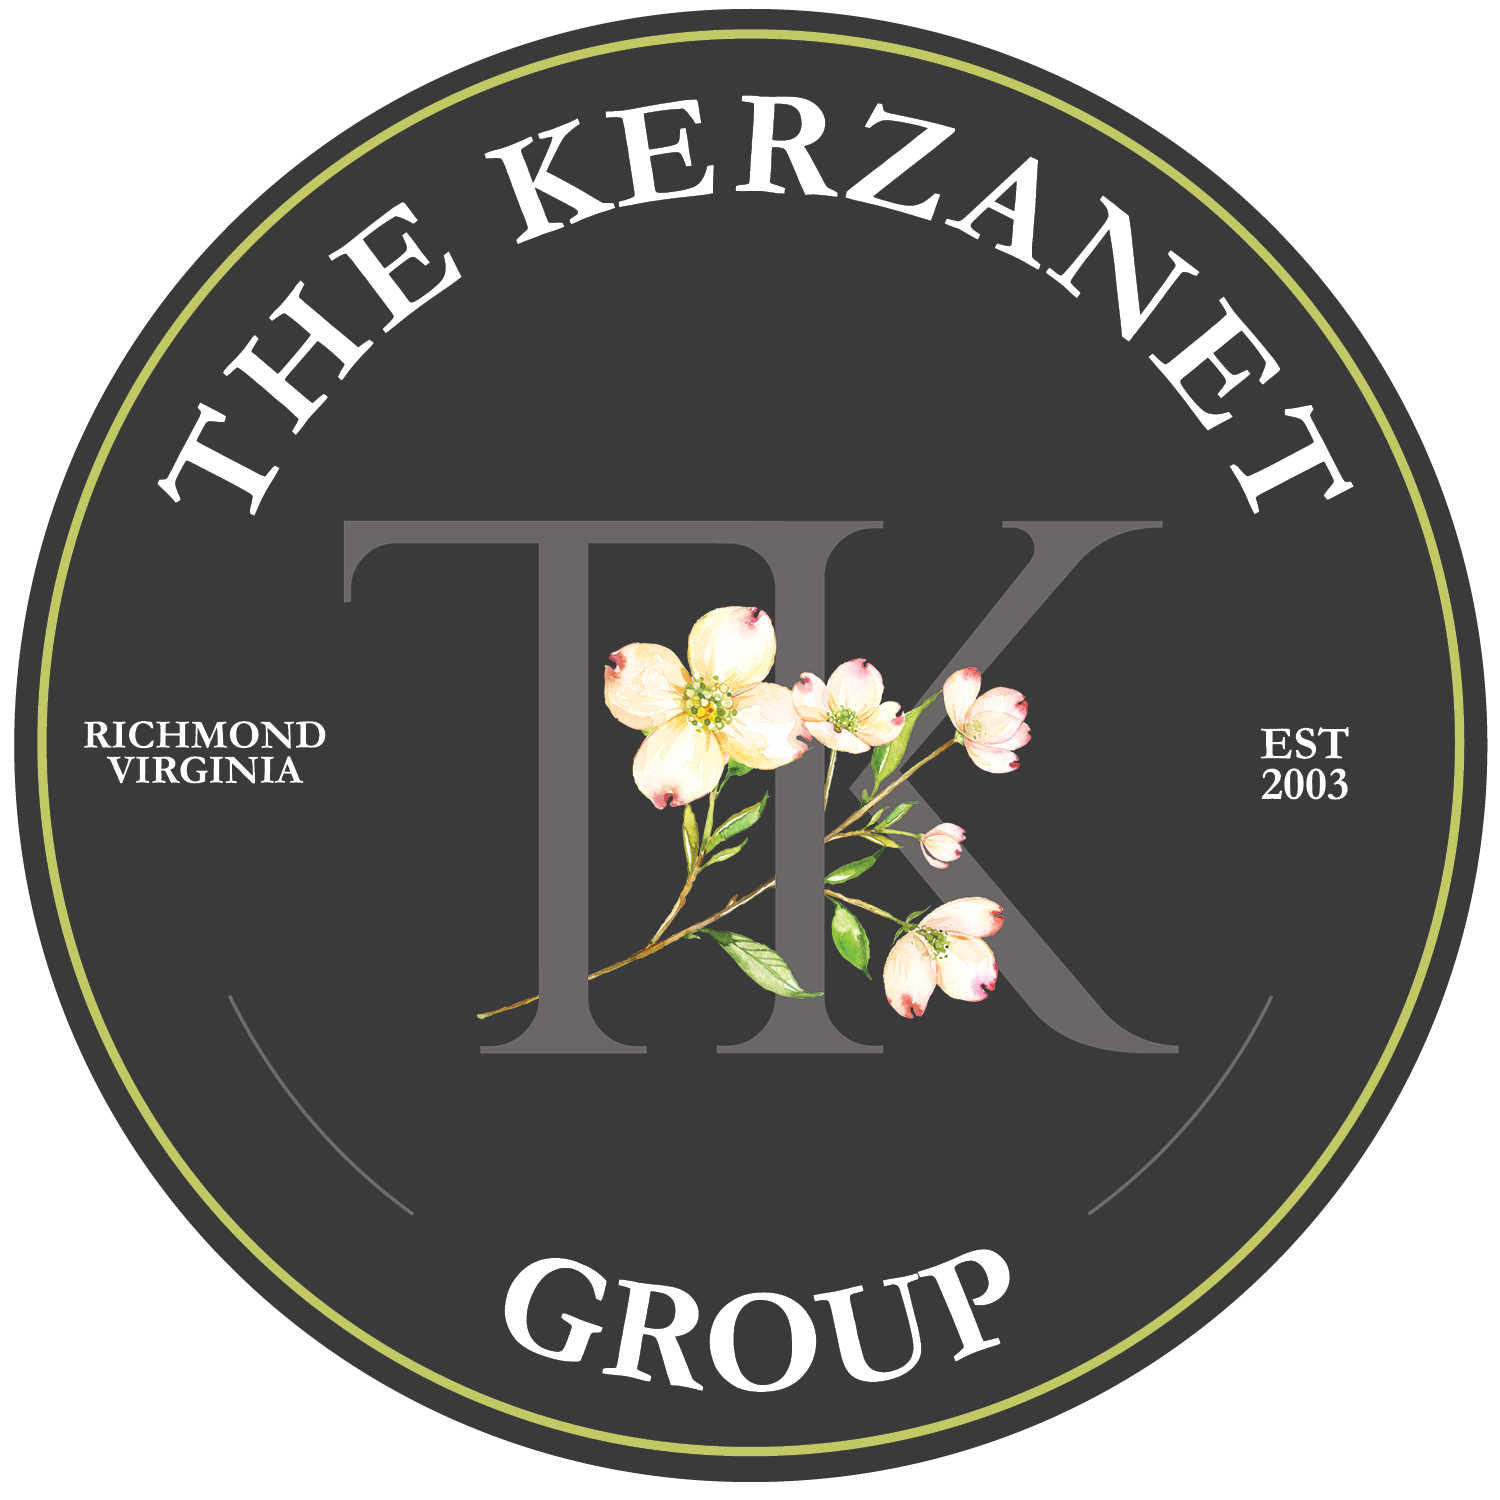 The Kerzanet Group